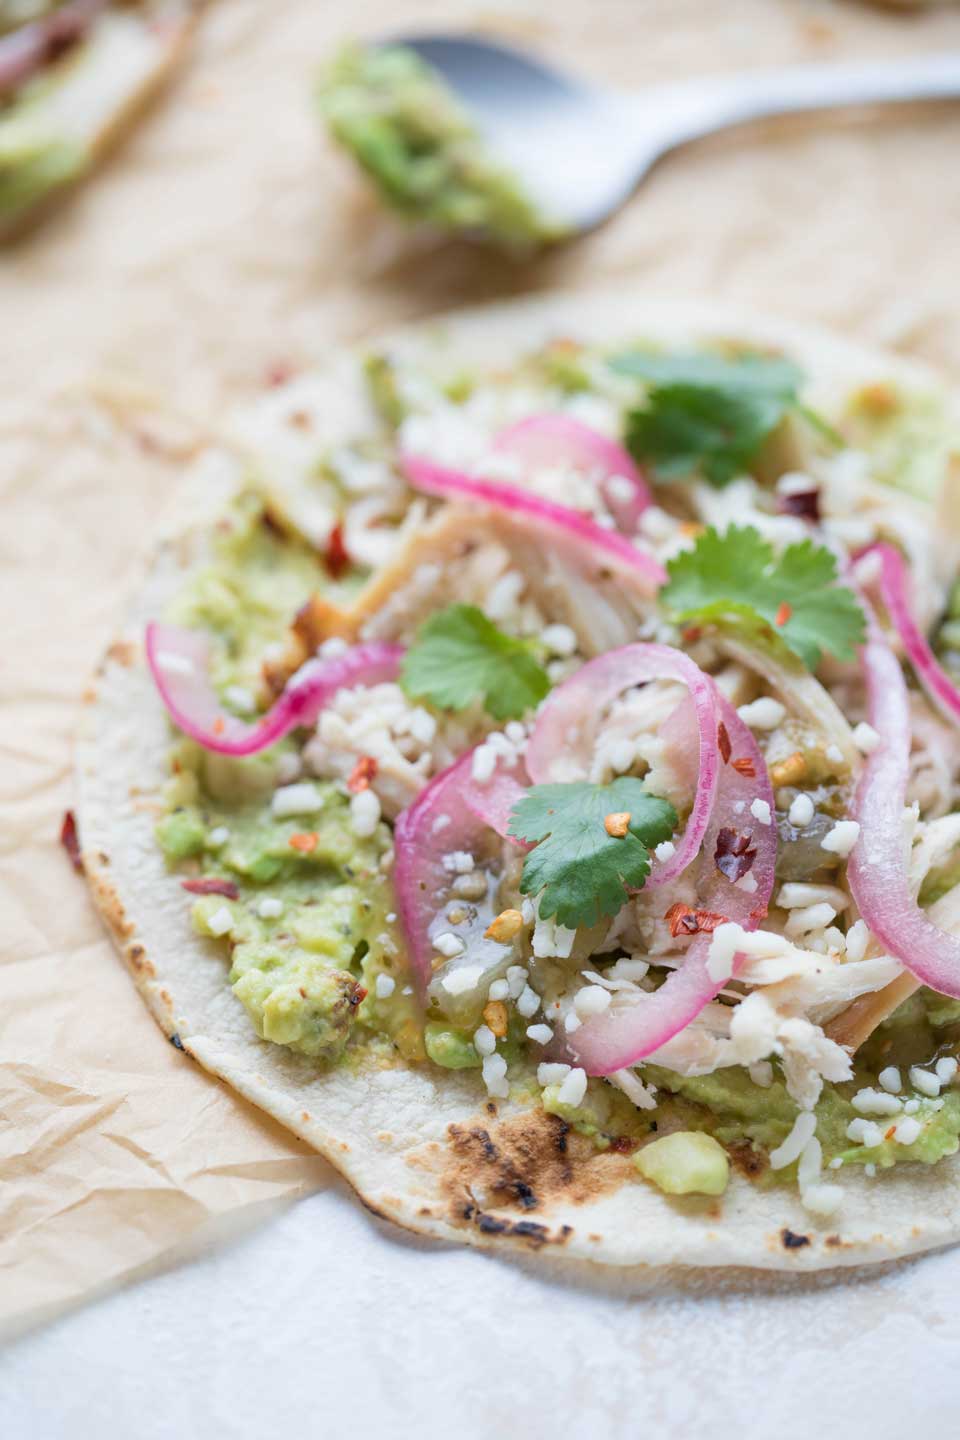 From the toasted corn tortillas to the pretty sprinkling of cilantro leaves on top, these chicken tacos are as gorgeous as they are delicious!